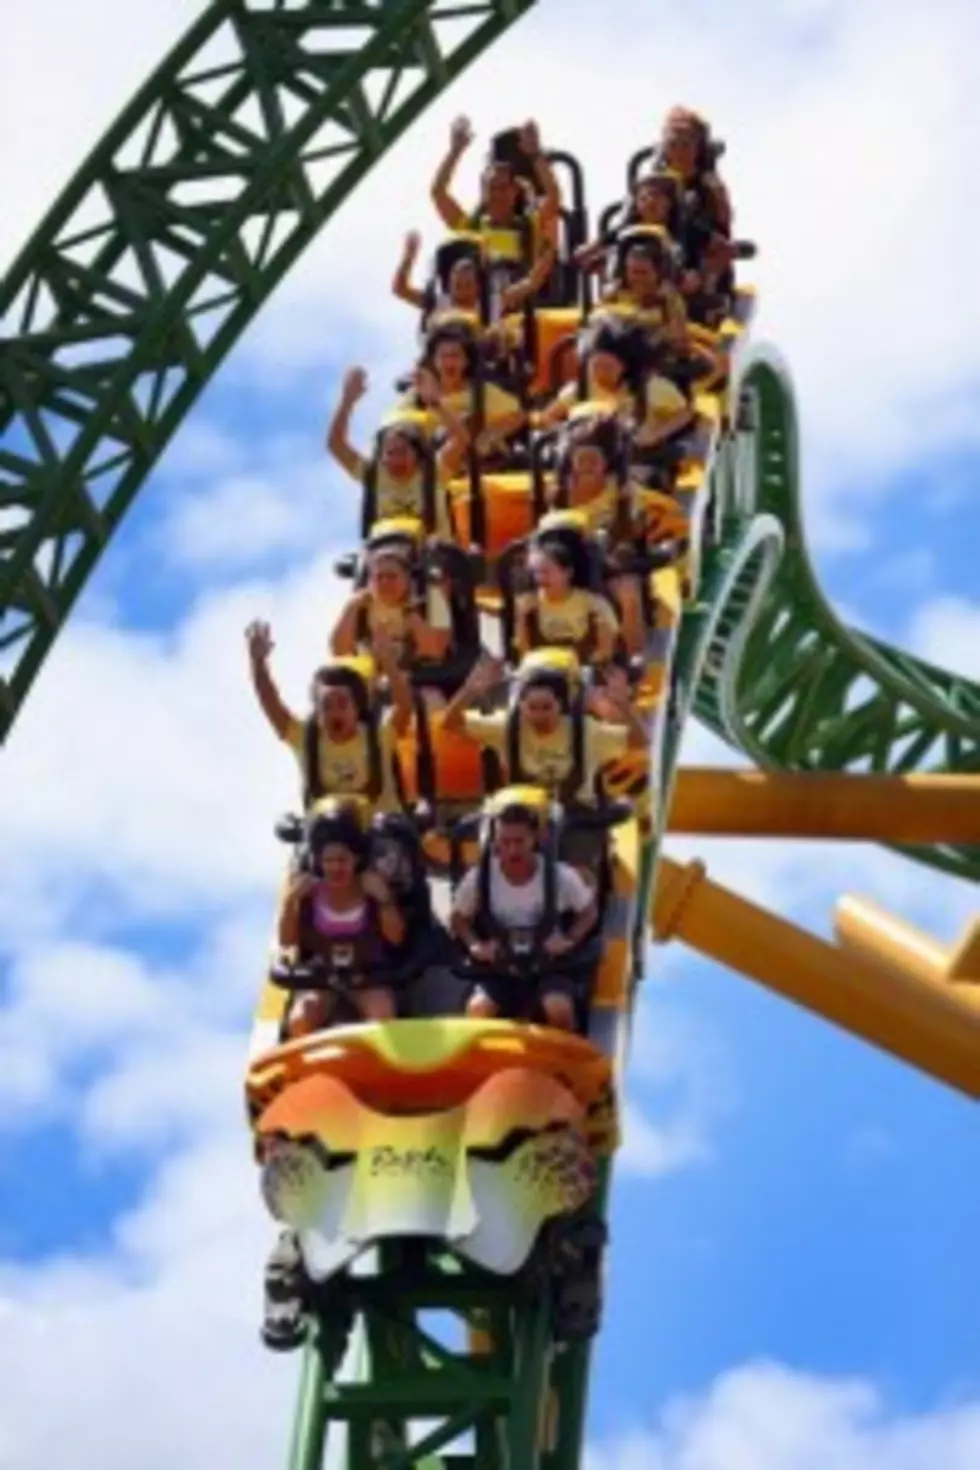 Are You Brave Enough To Handle These Roller Coasters? [VIDEOS]